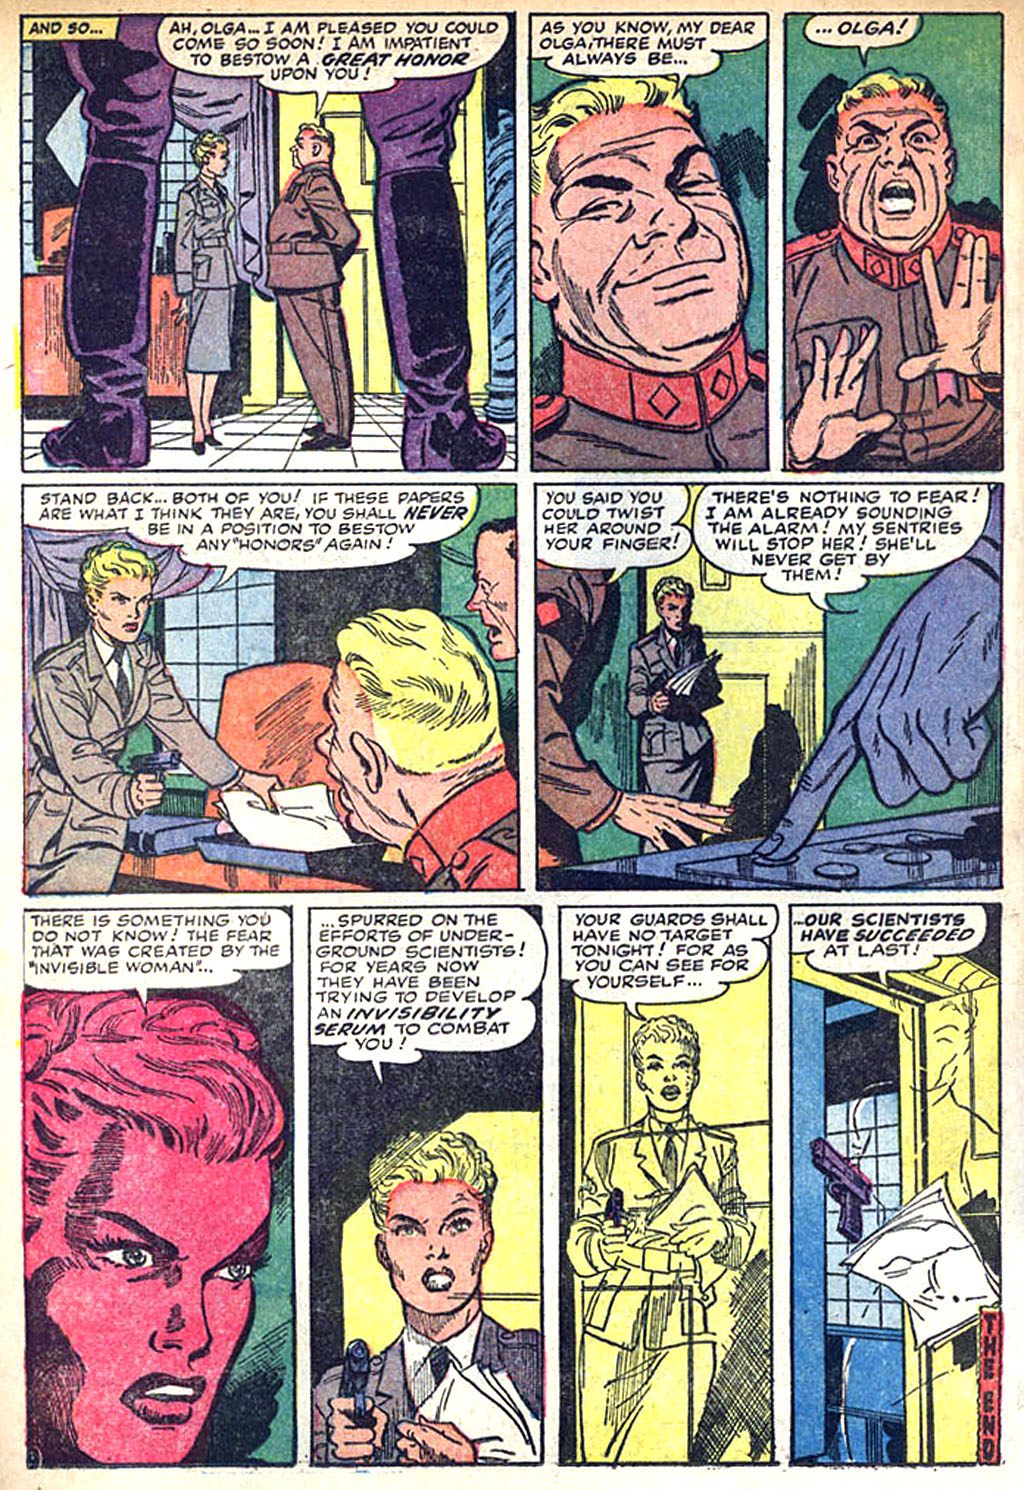 Journey Into Mystery (1952) 43 Page 11